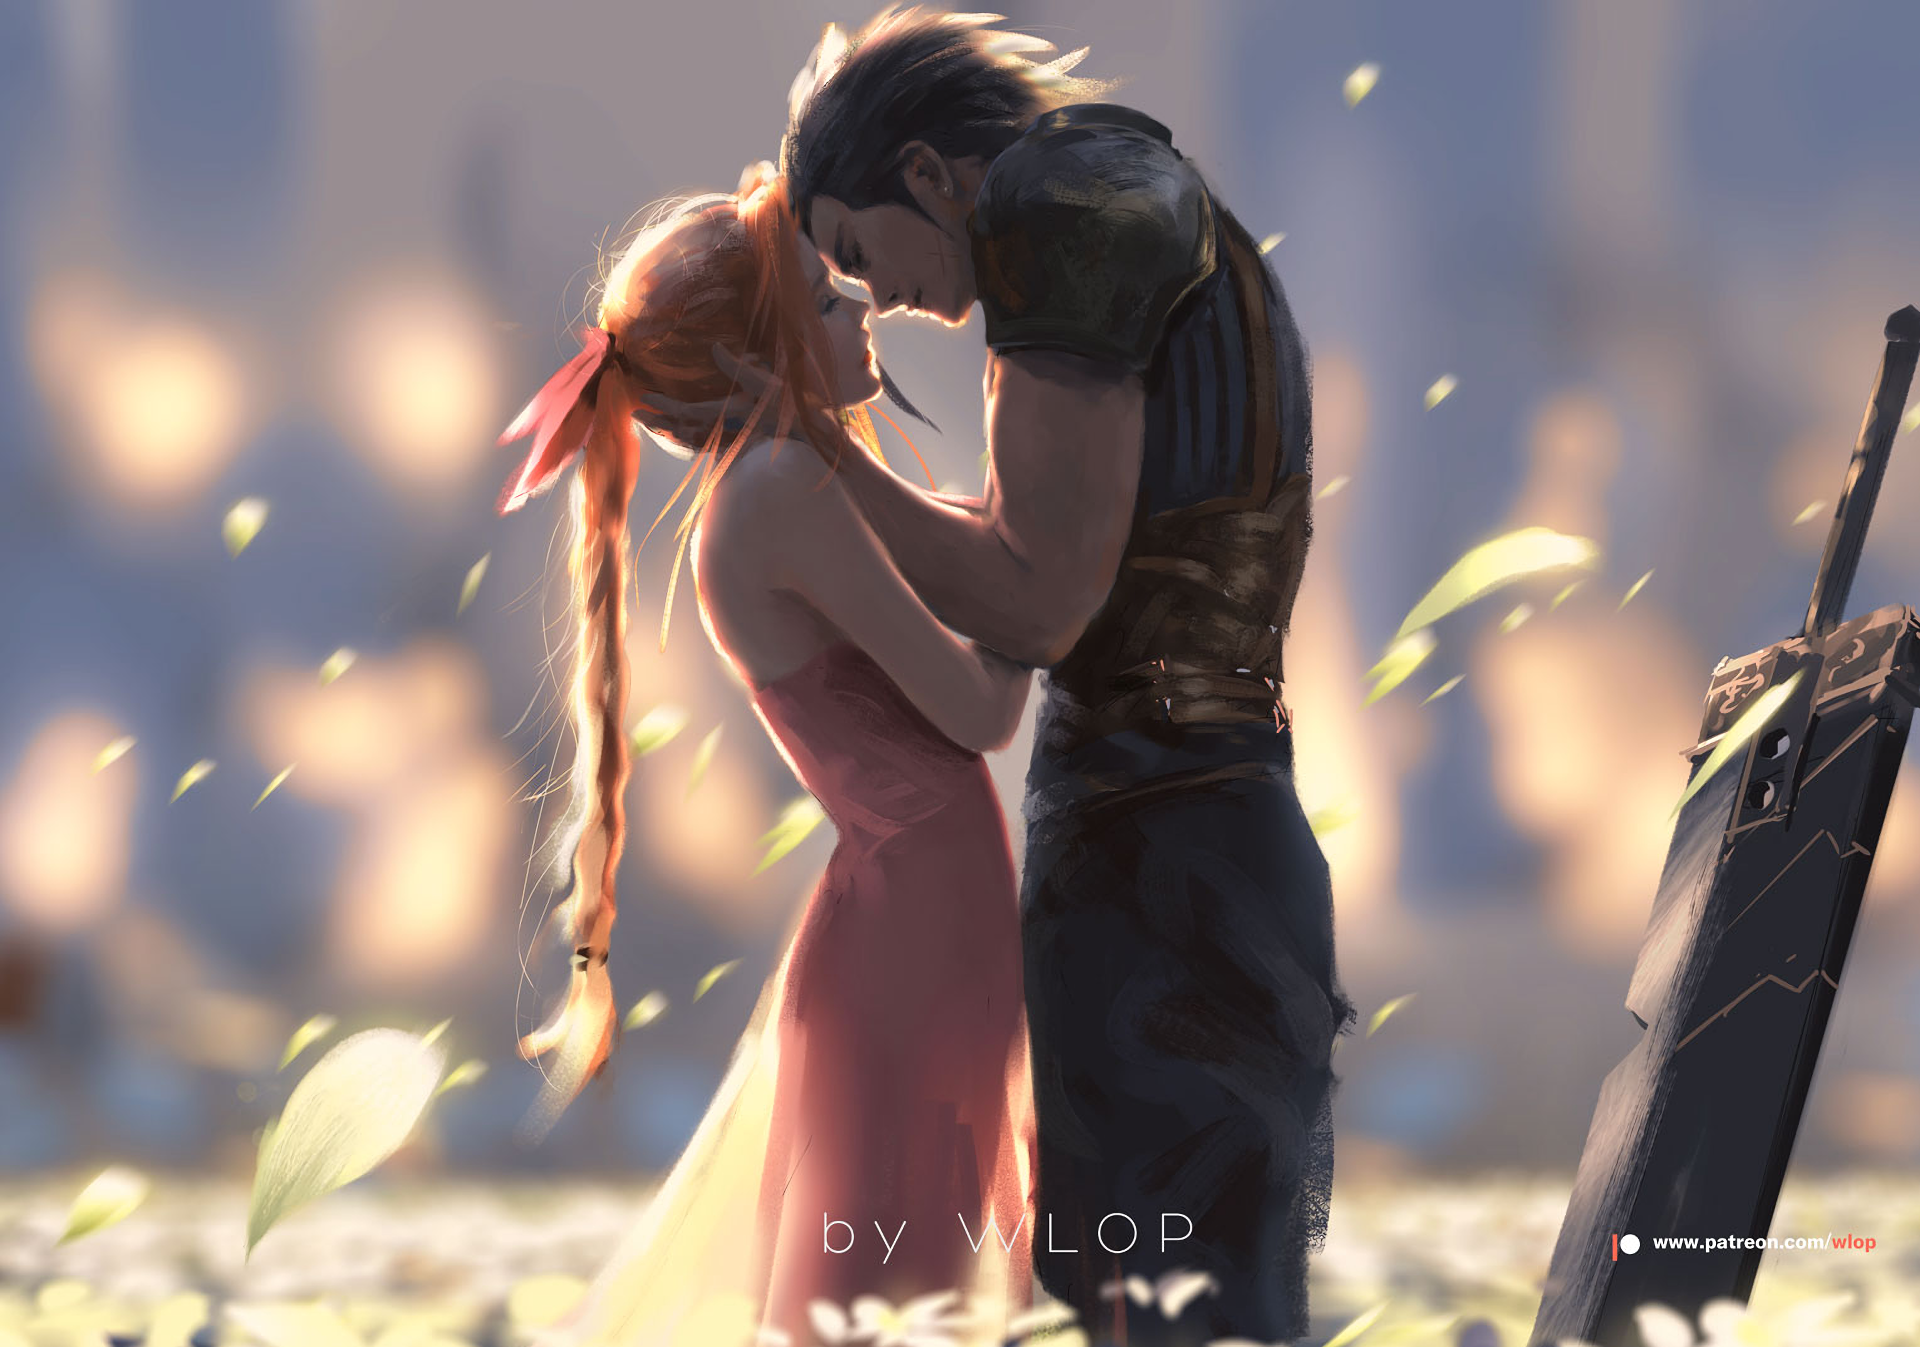 WLOP Aerith and Zack wallpaper by Wang Ling